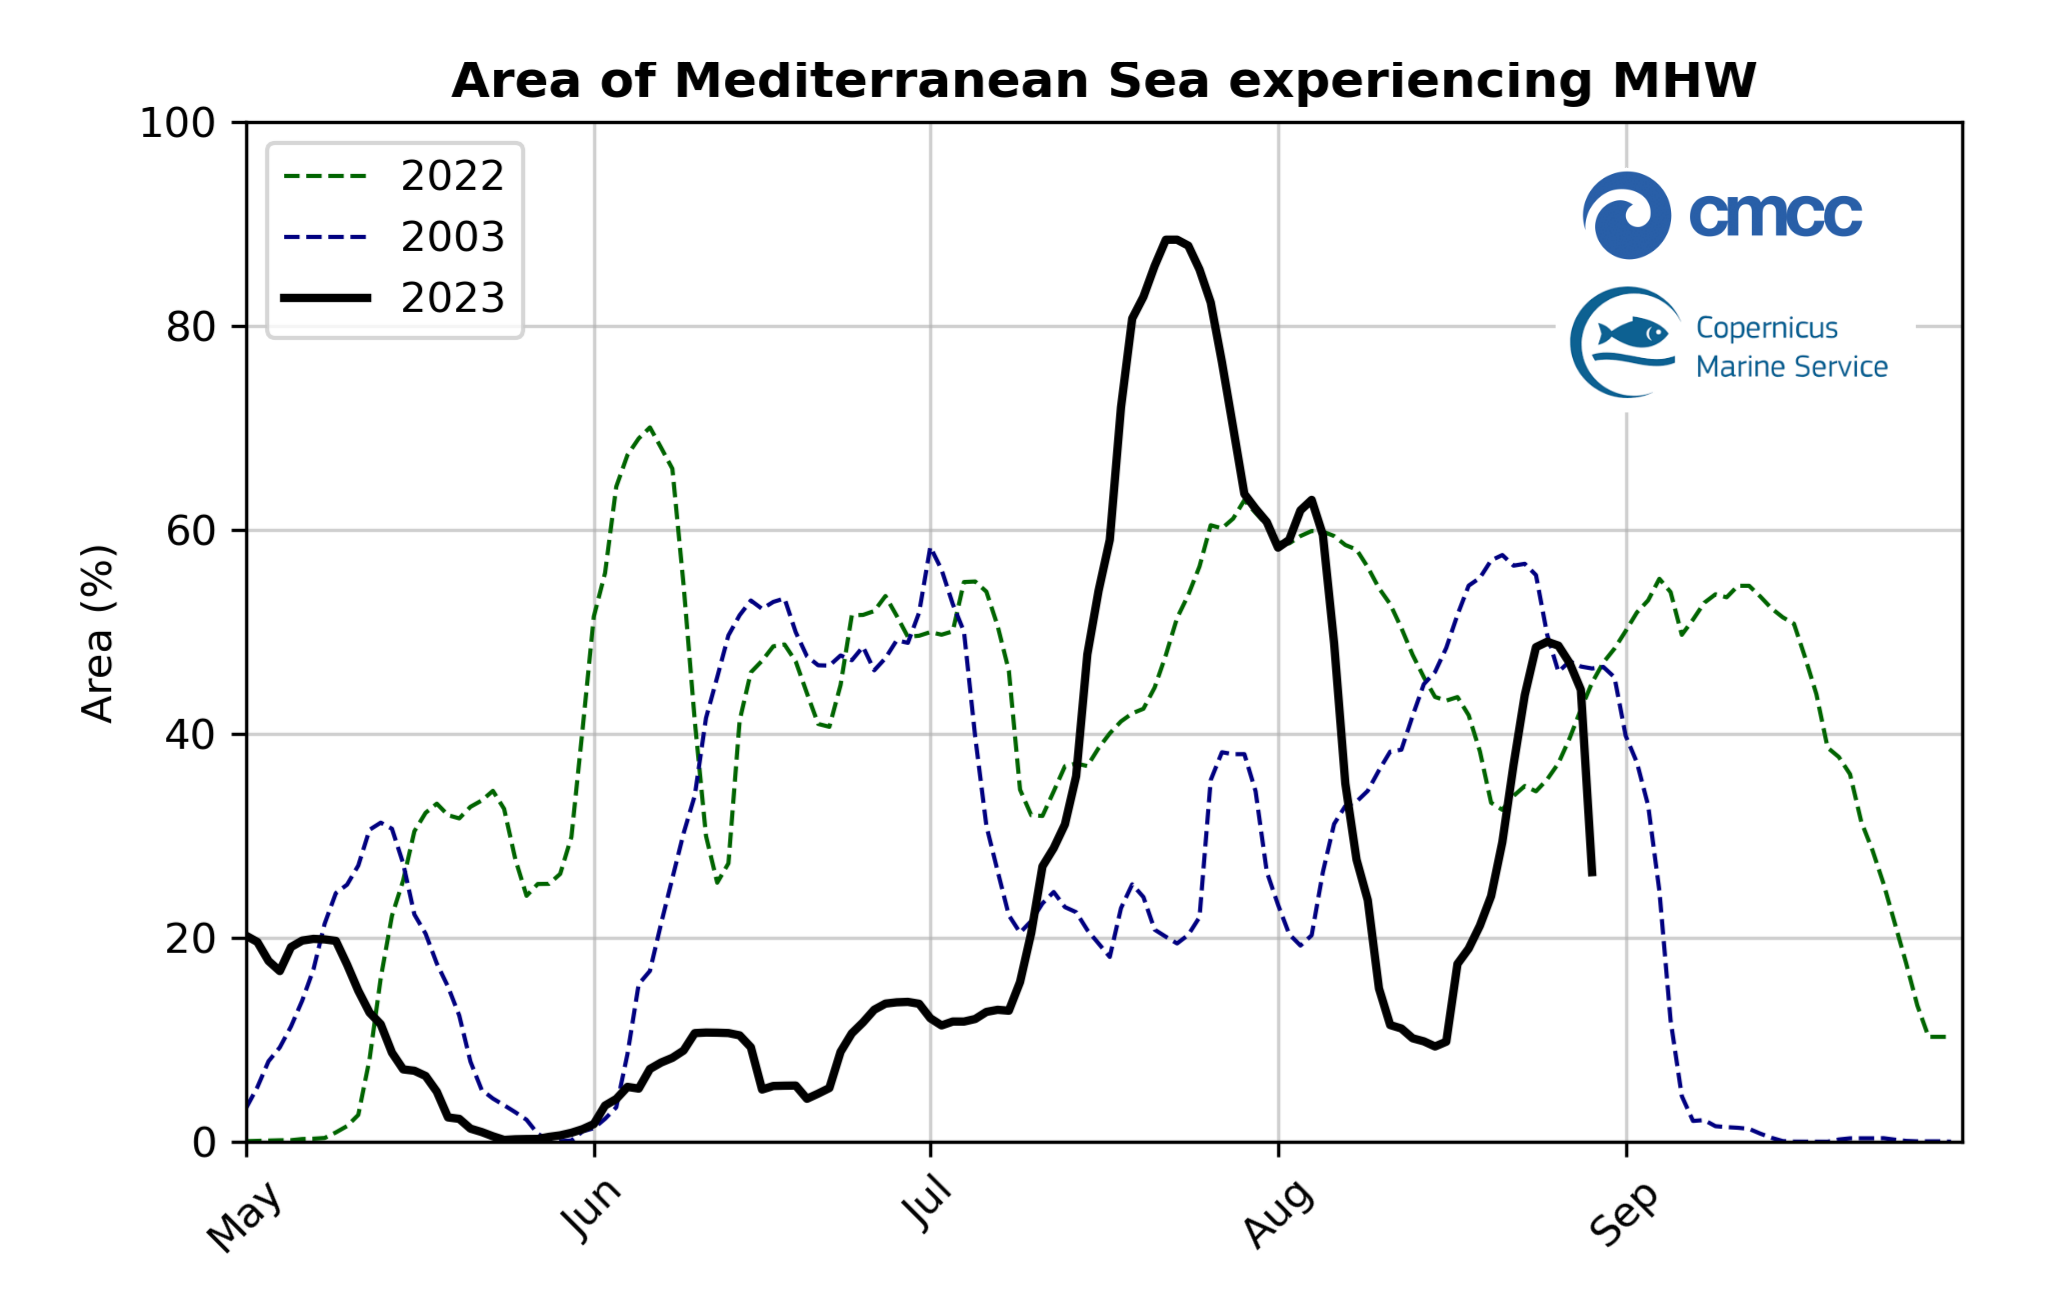 Area (%) of Mediterranean Sea surface experiencing a Marine Heat Wave during 2023